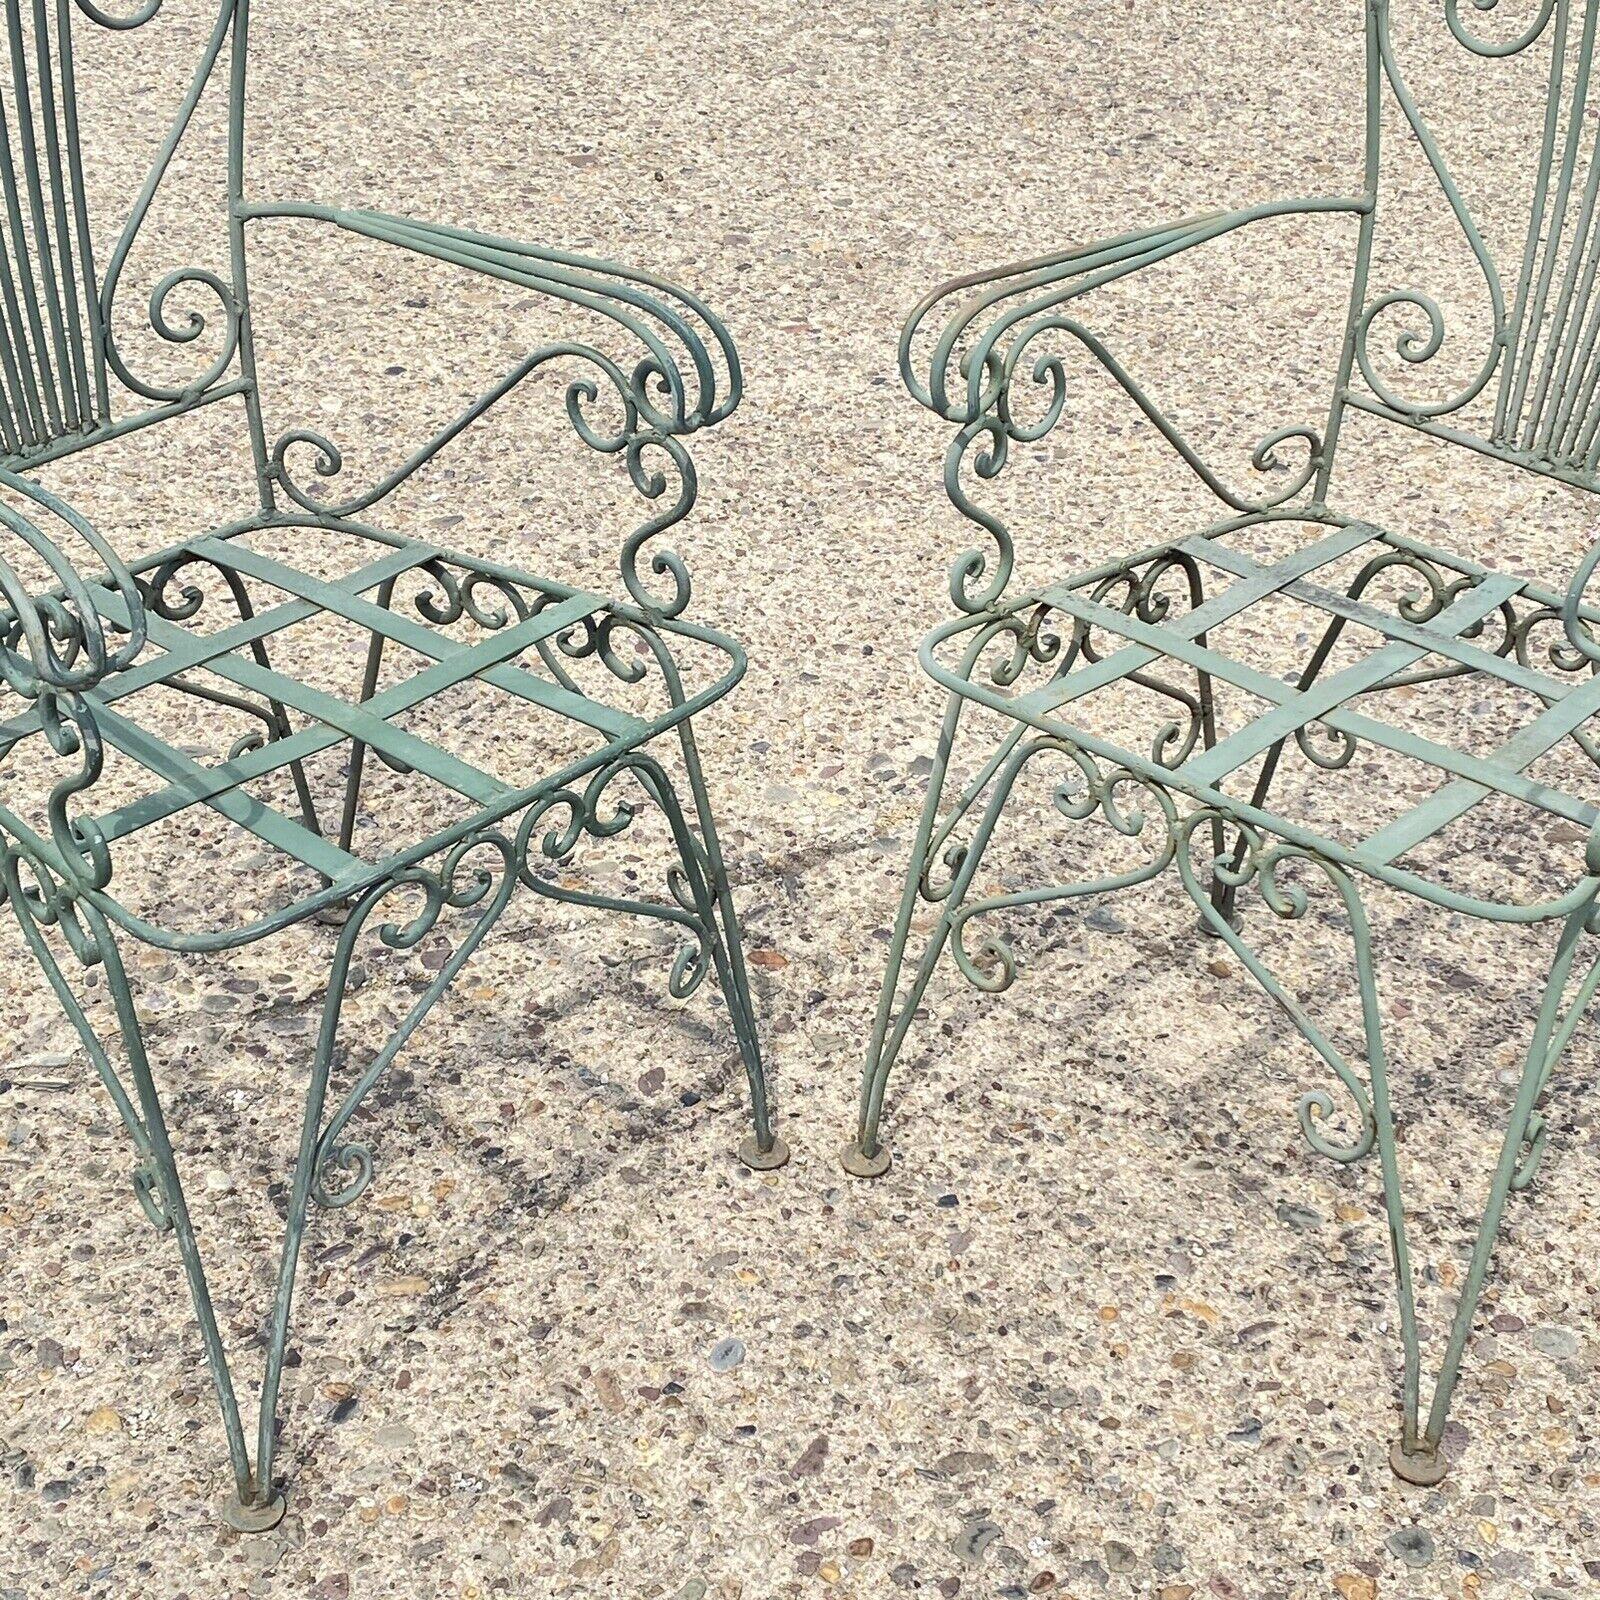 20th Century Vintage Neoclassical Style Green Wrought Iron Lyre Harp Garden Chairs - Set of 4 For Sale